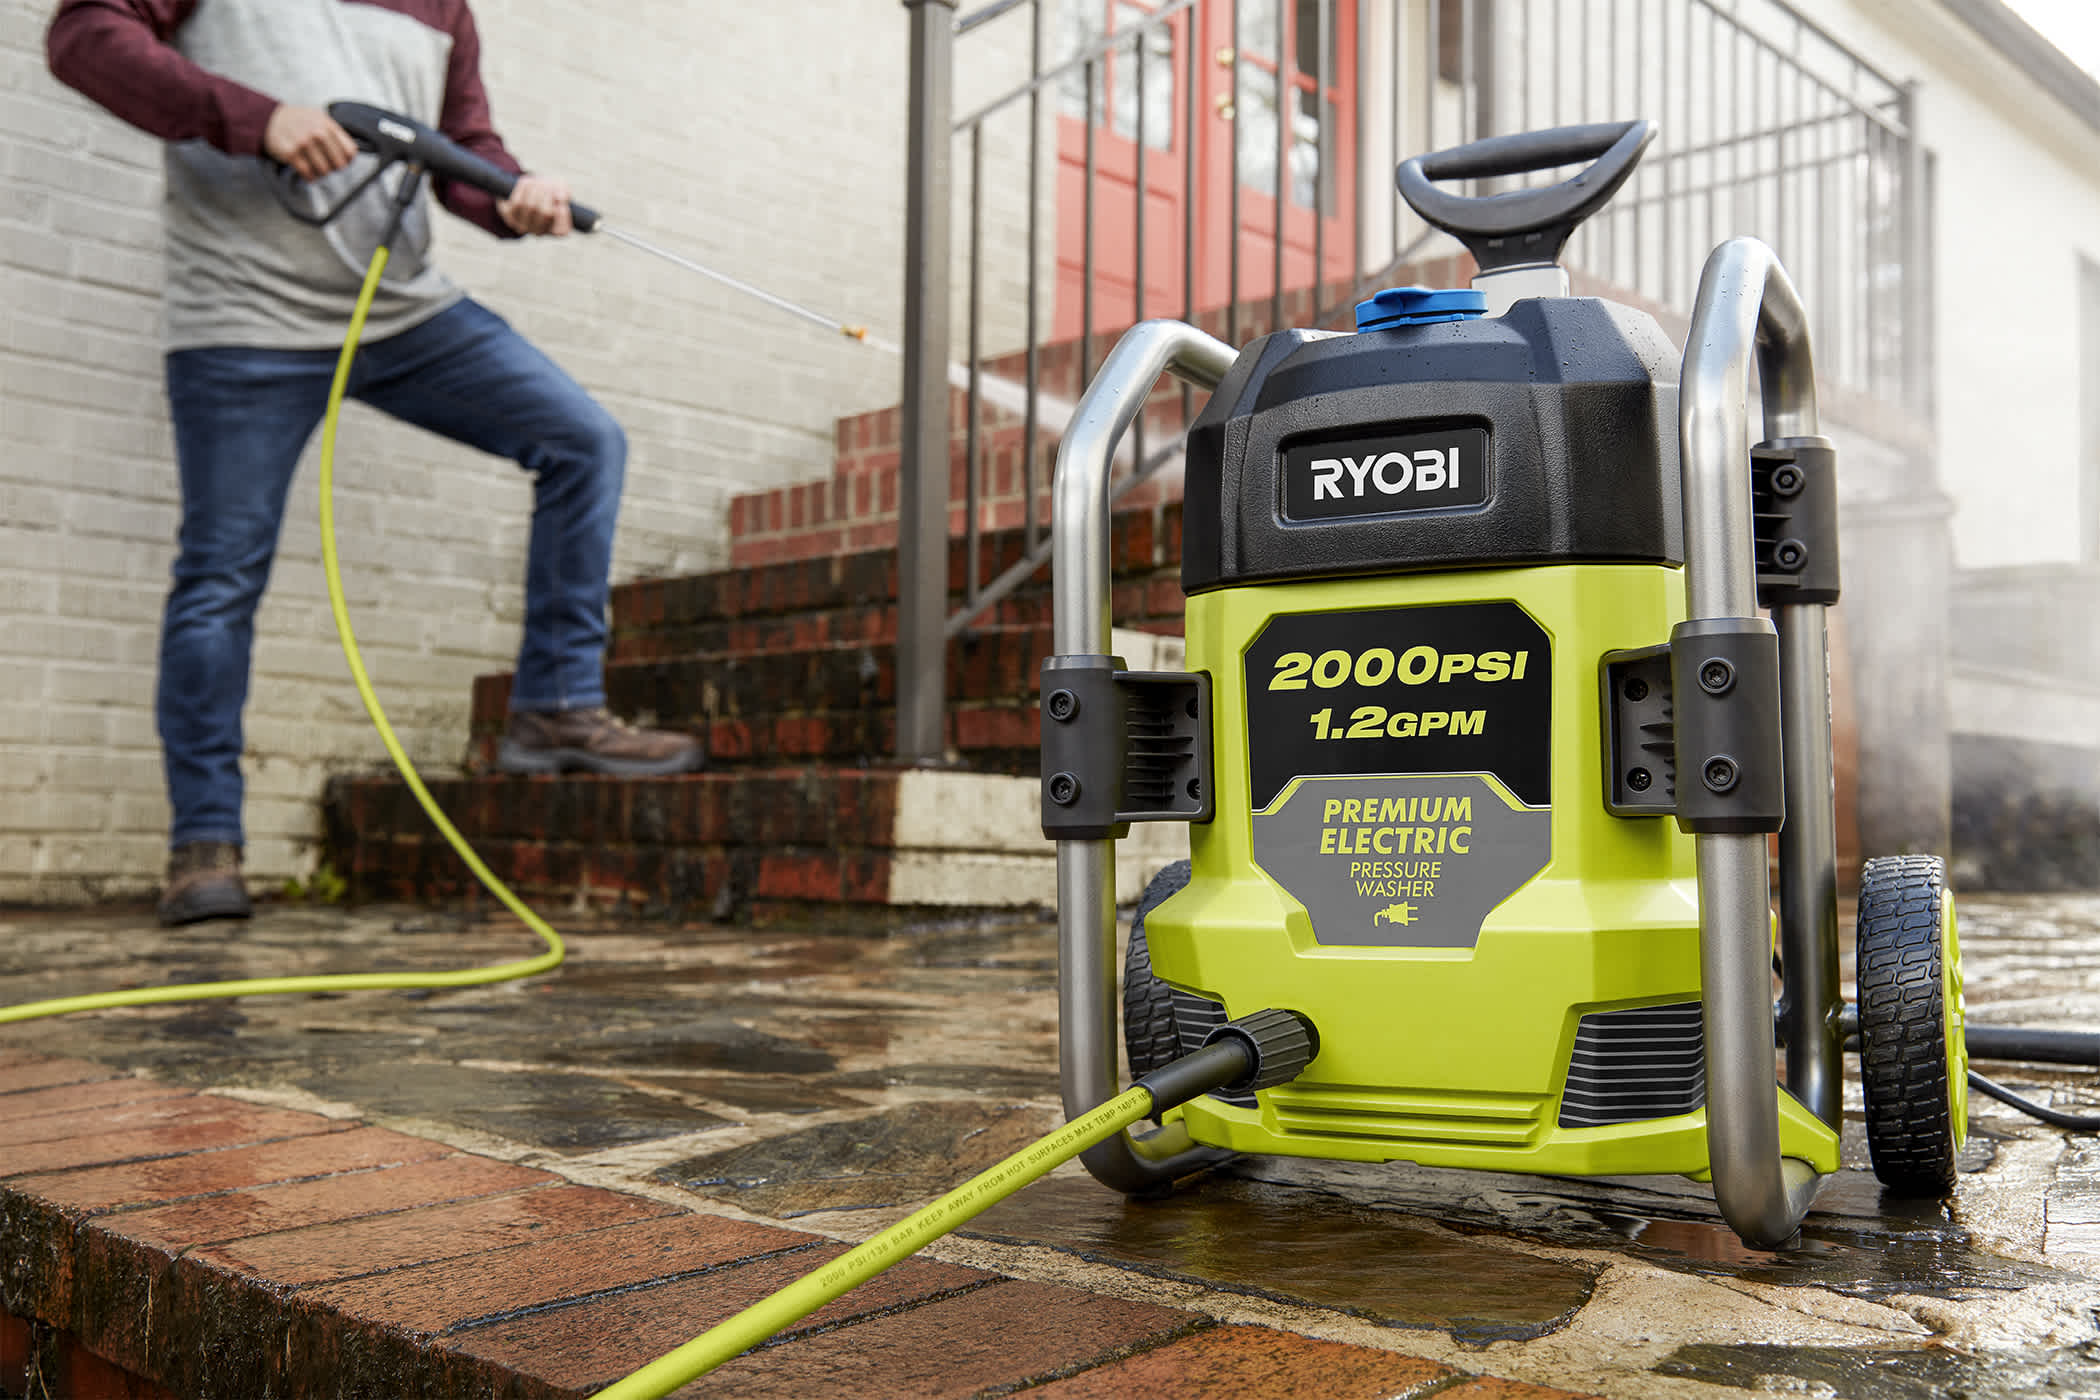 Product Features Image for 2000 PSI 1.2 GPM COLD WATER ELECTRIC PRESSURE WASHER.